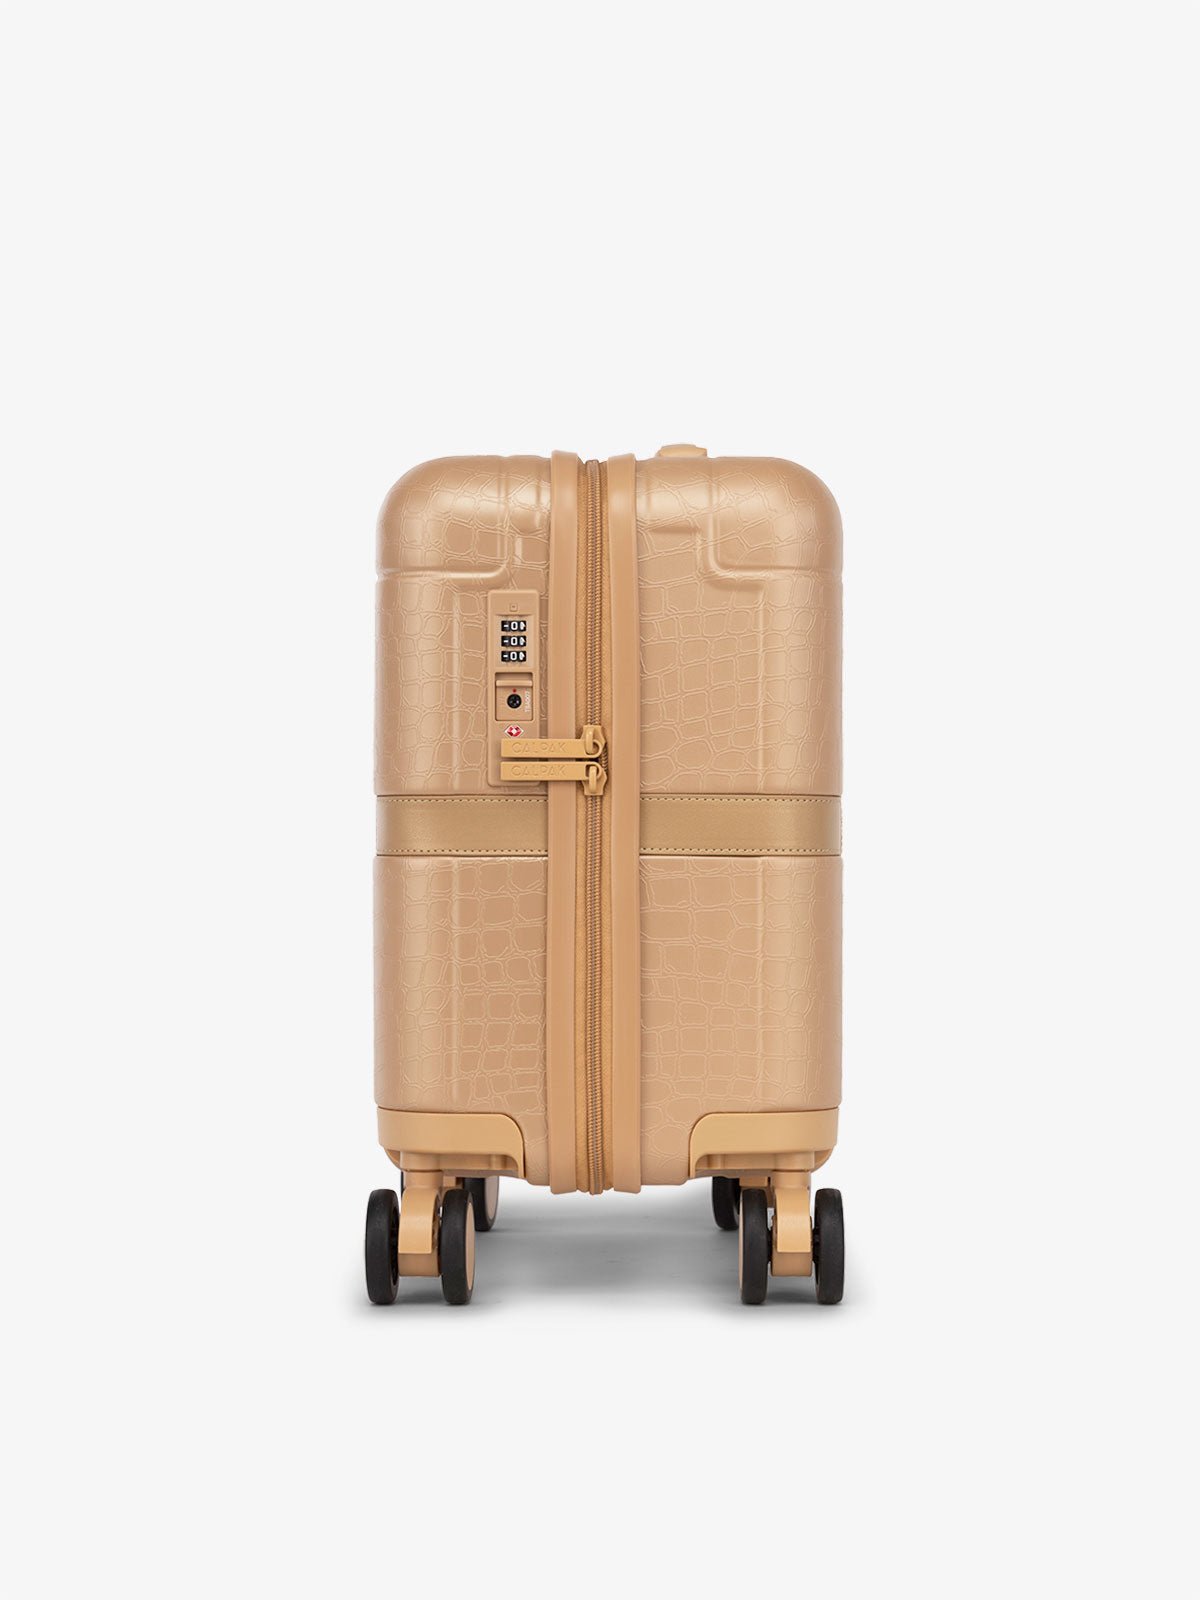 CALPAK TRNK mini luggage with TSA approved lock and 360 spinner wheels in beige